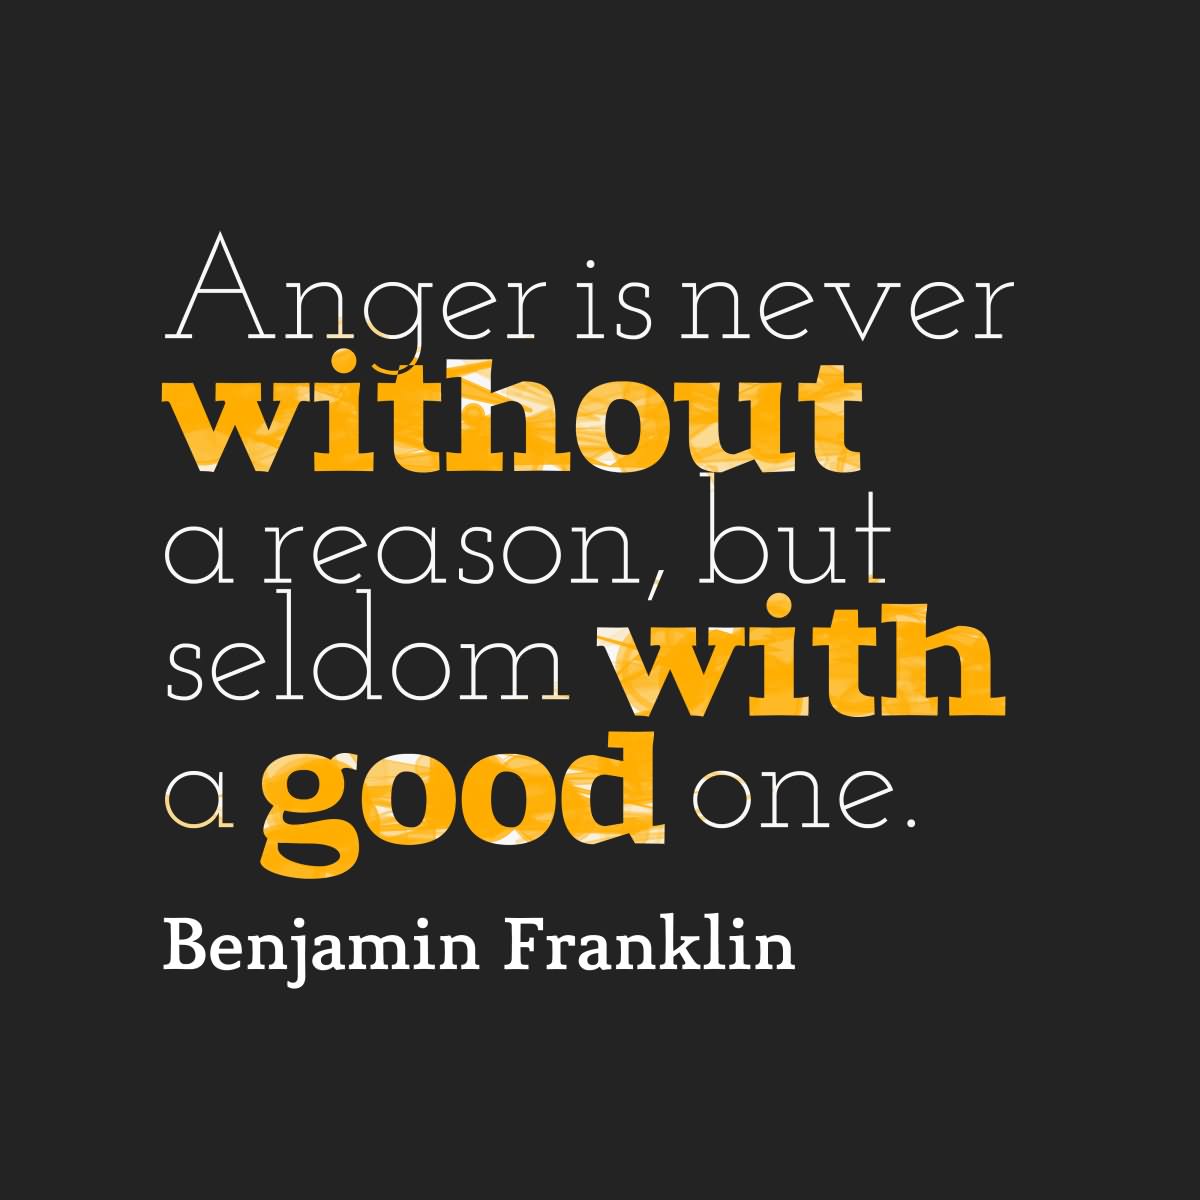 Anger is never without Reason, but seldom with a good One. - Benjamin Franklin.